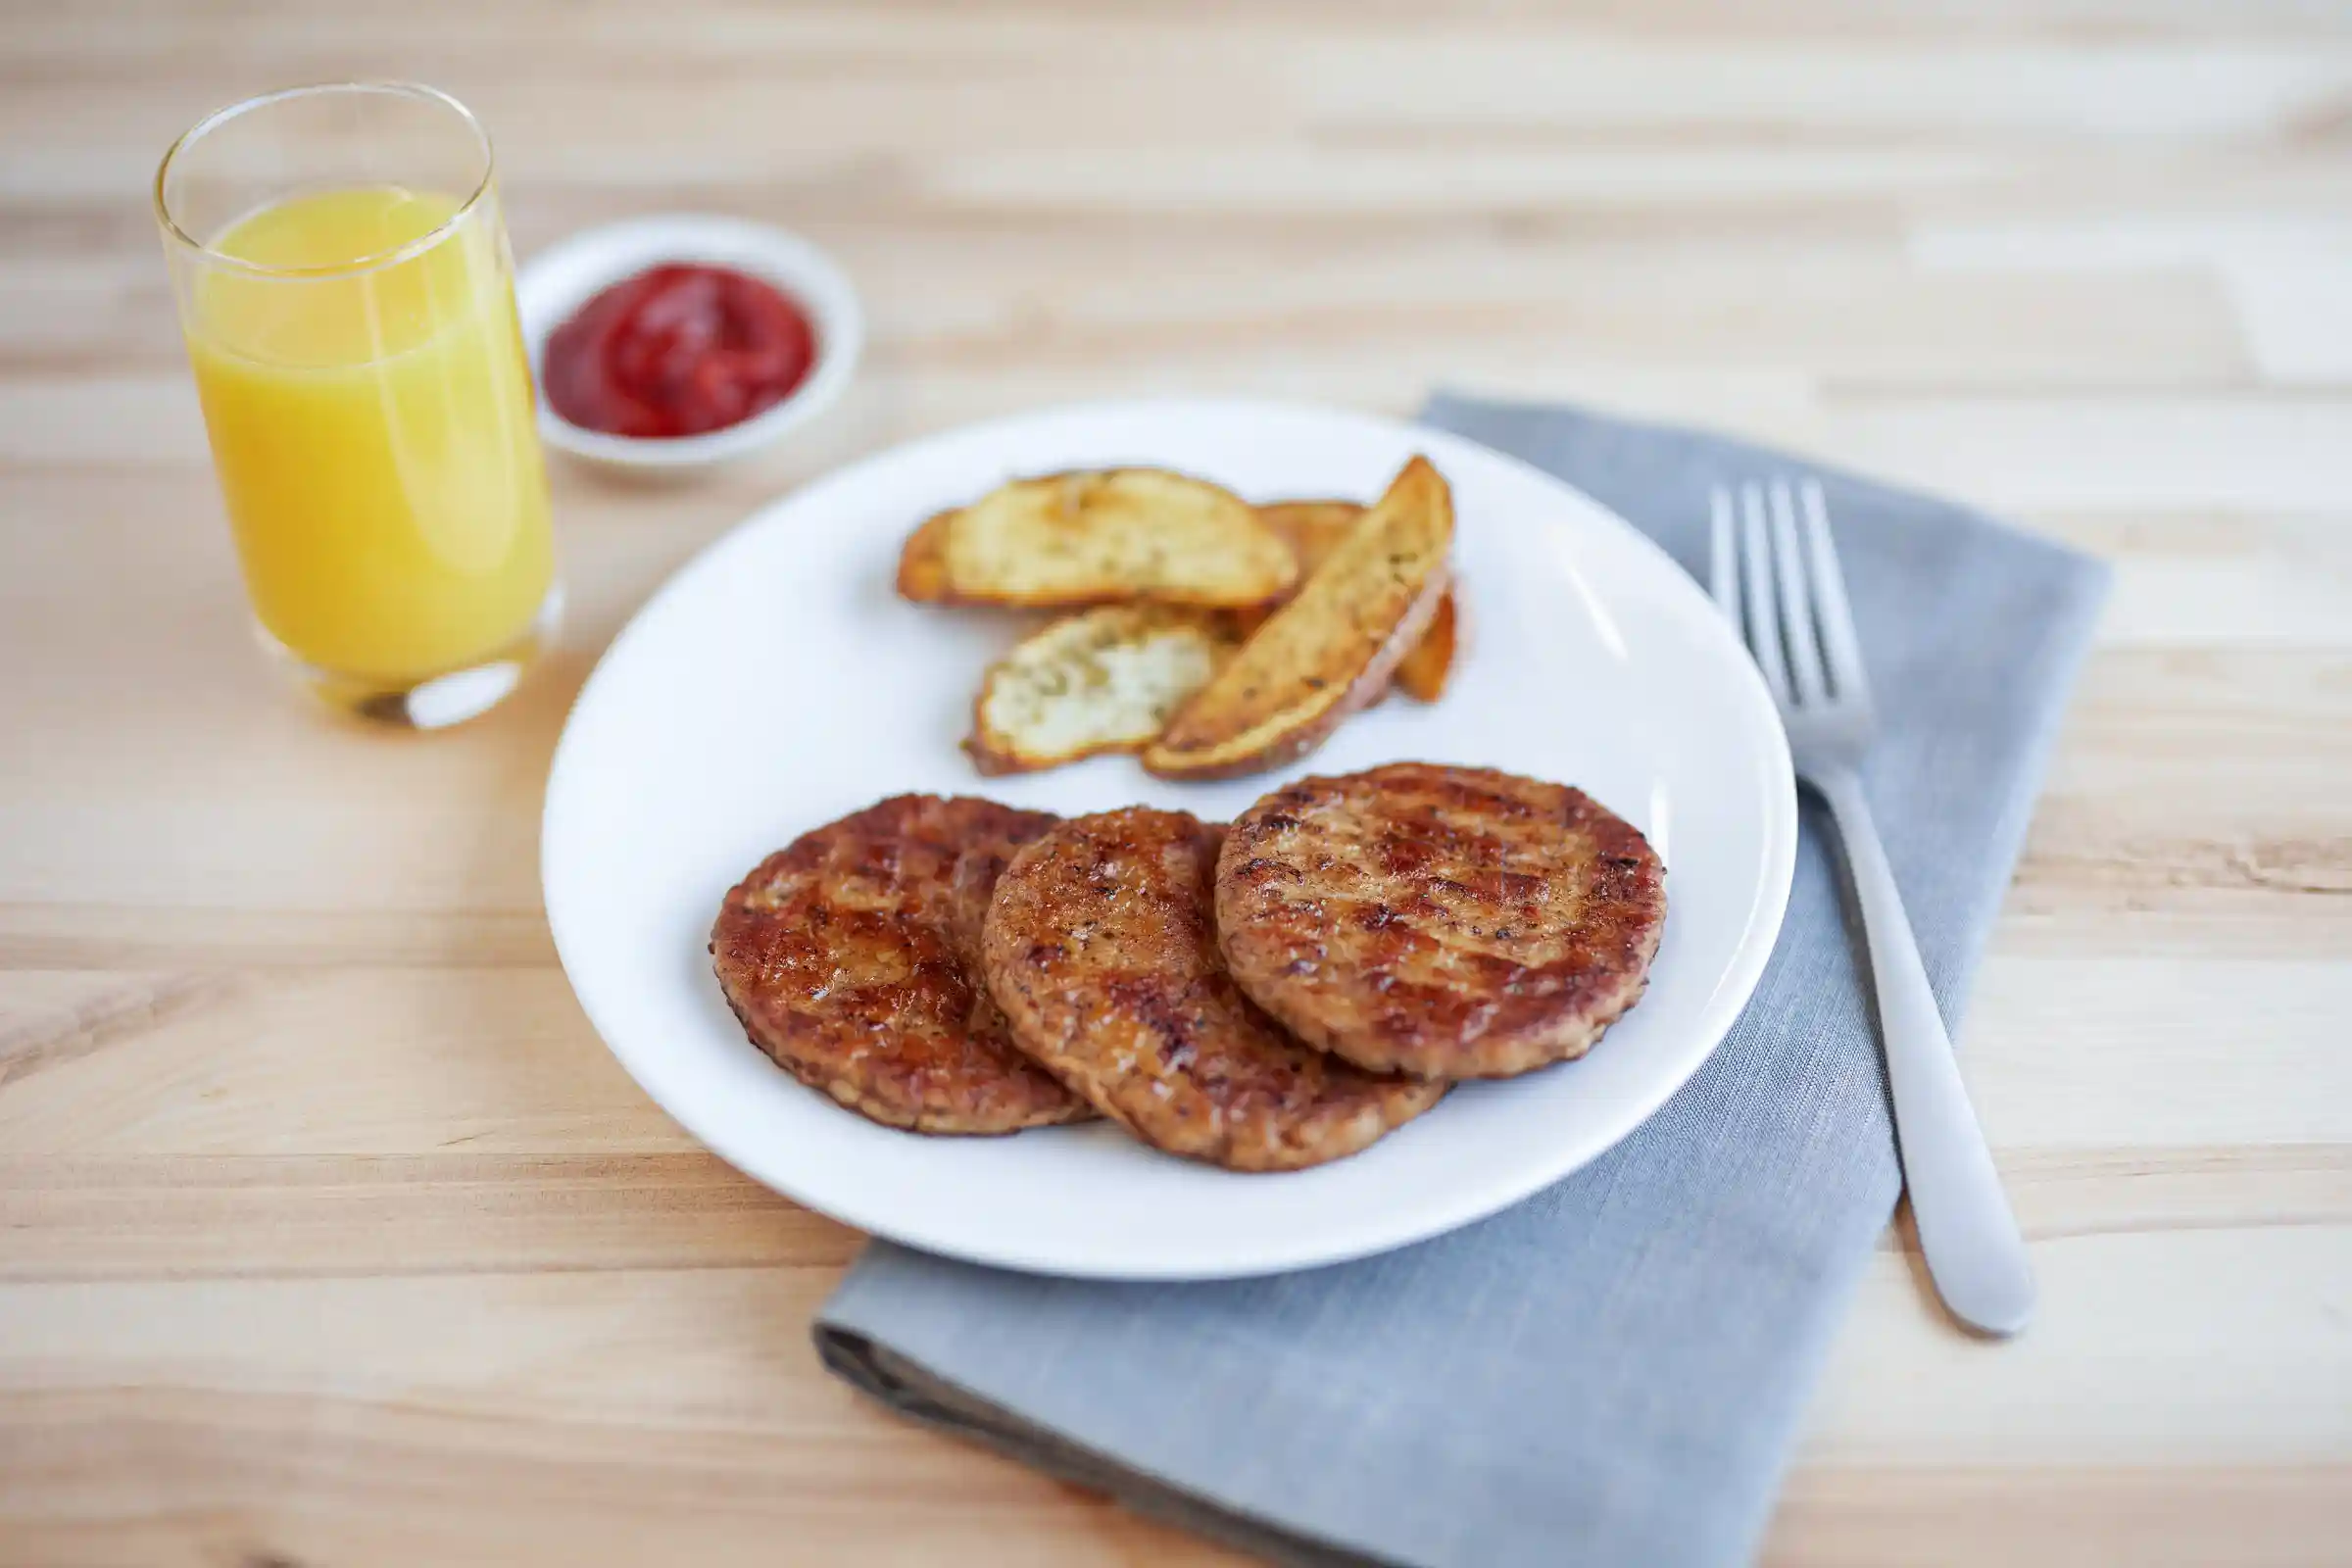 Jimmy Dean® Fully Cooked Pork Sausage Patties, 1.0 ozhttps://images.salsify.com/image/upload/s--nK_NFI9N--/q_25/h4gtpvyzedl3rtktbhdu.webp